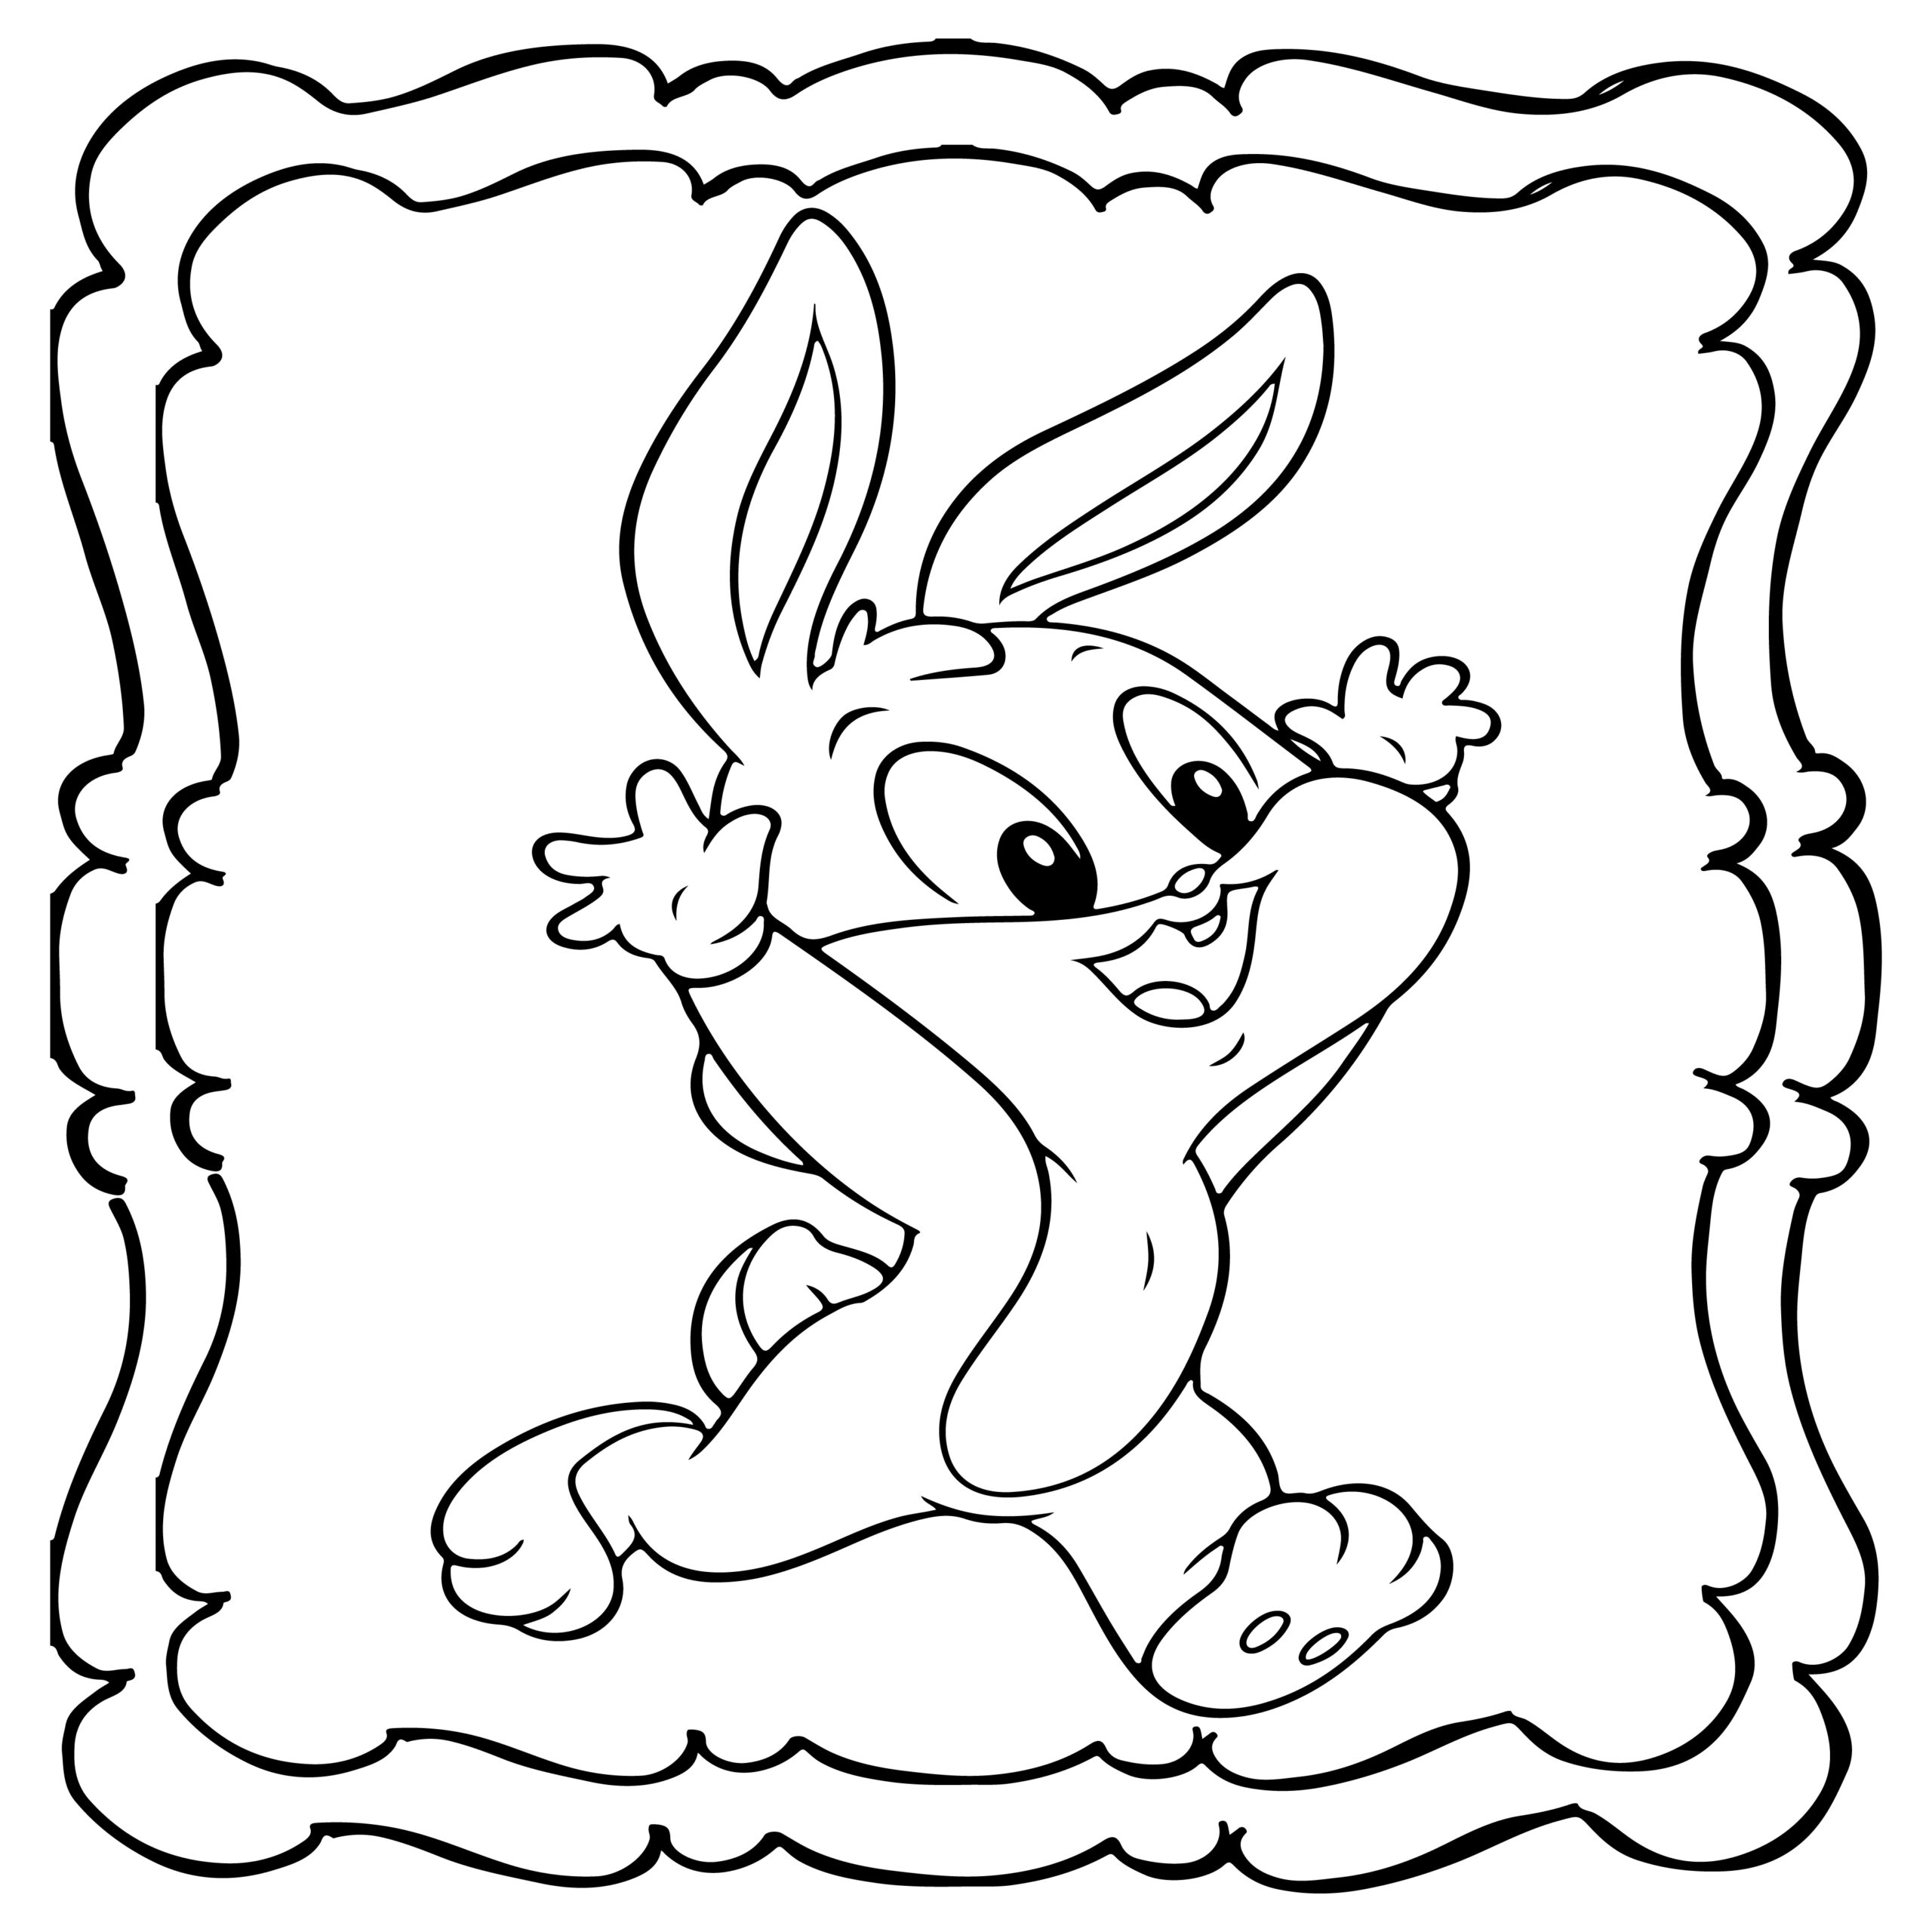 Easter bunny coloring book easy and fun bunny colouring book for kids made by teachers